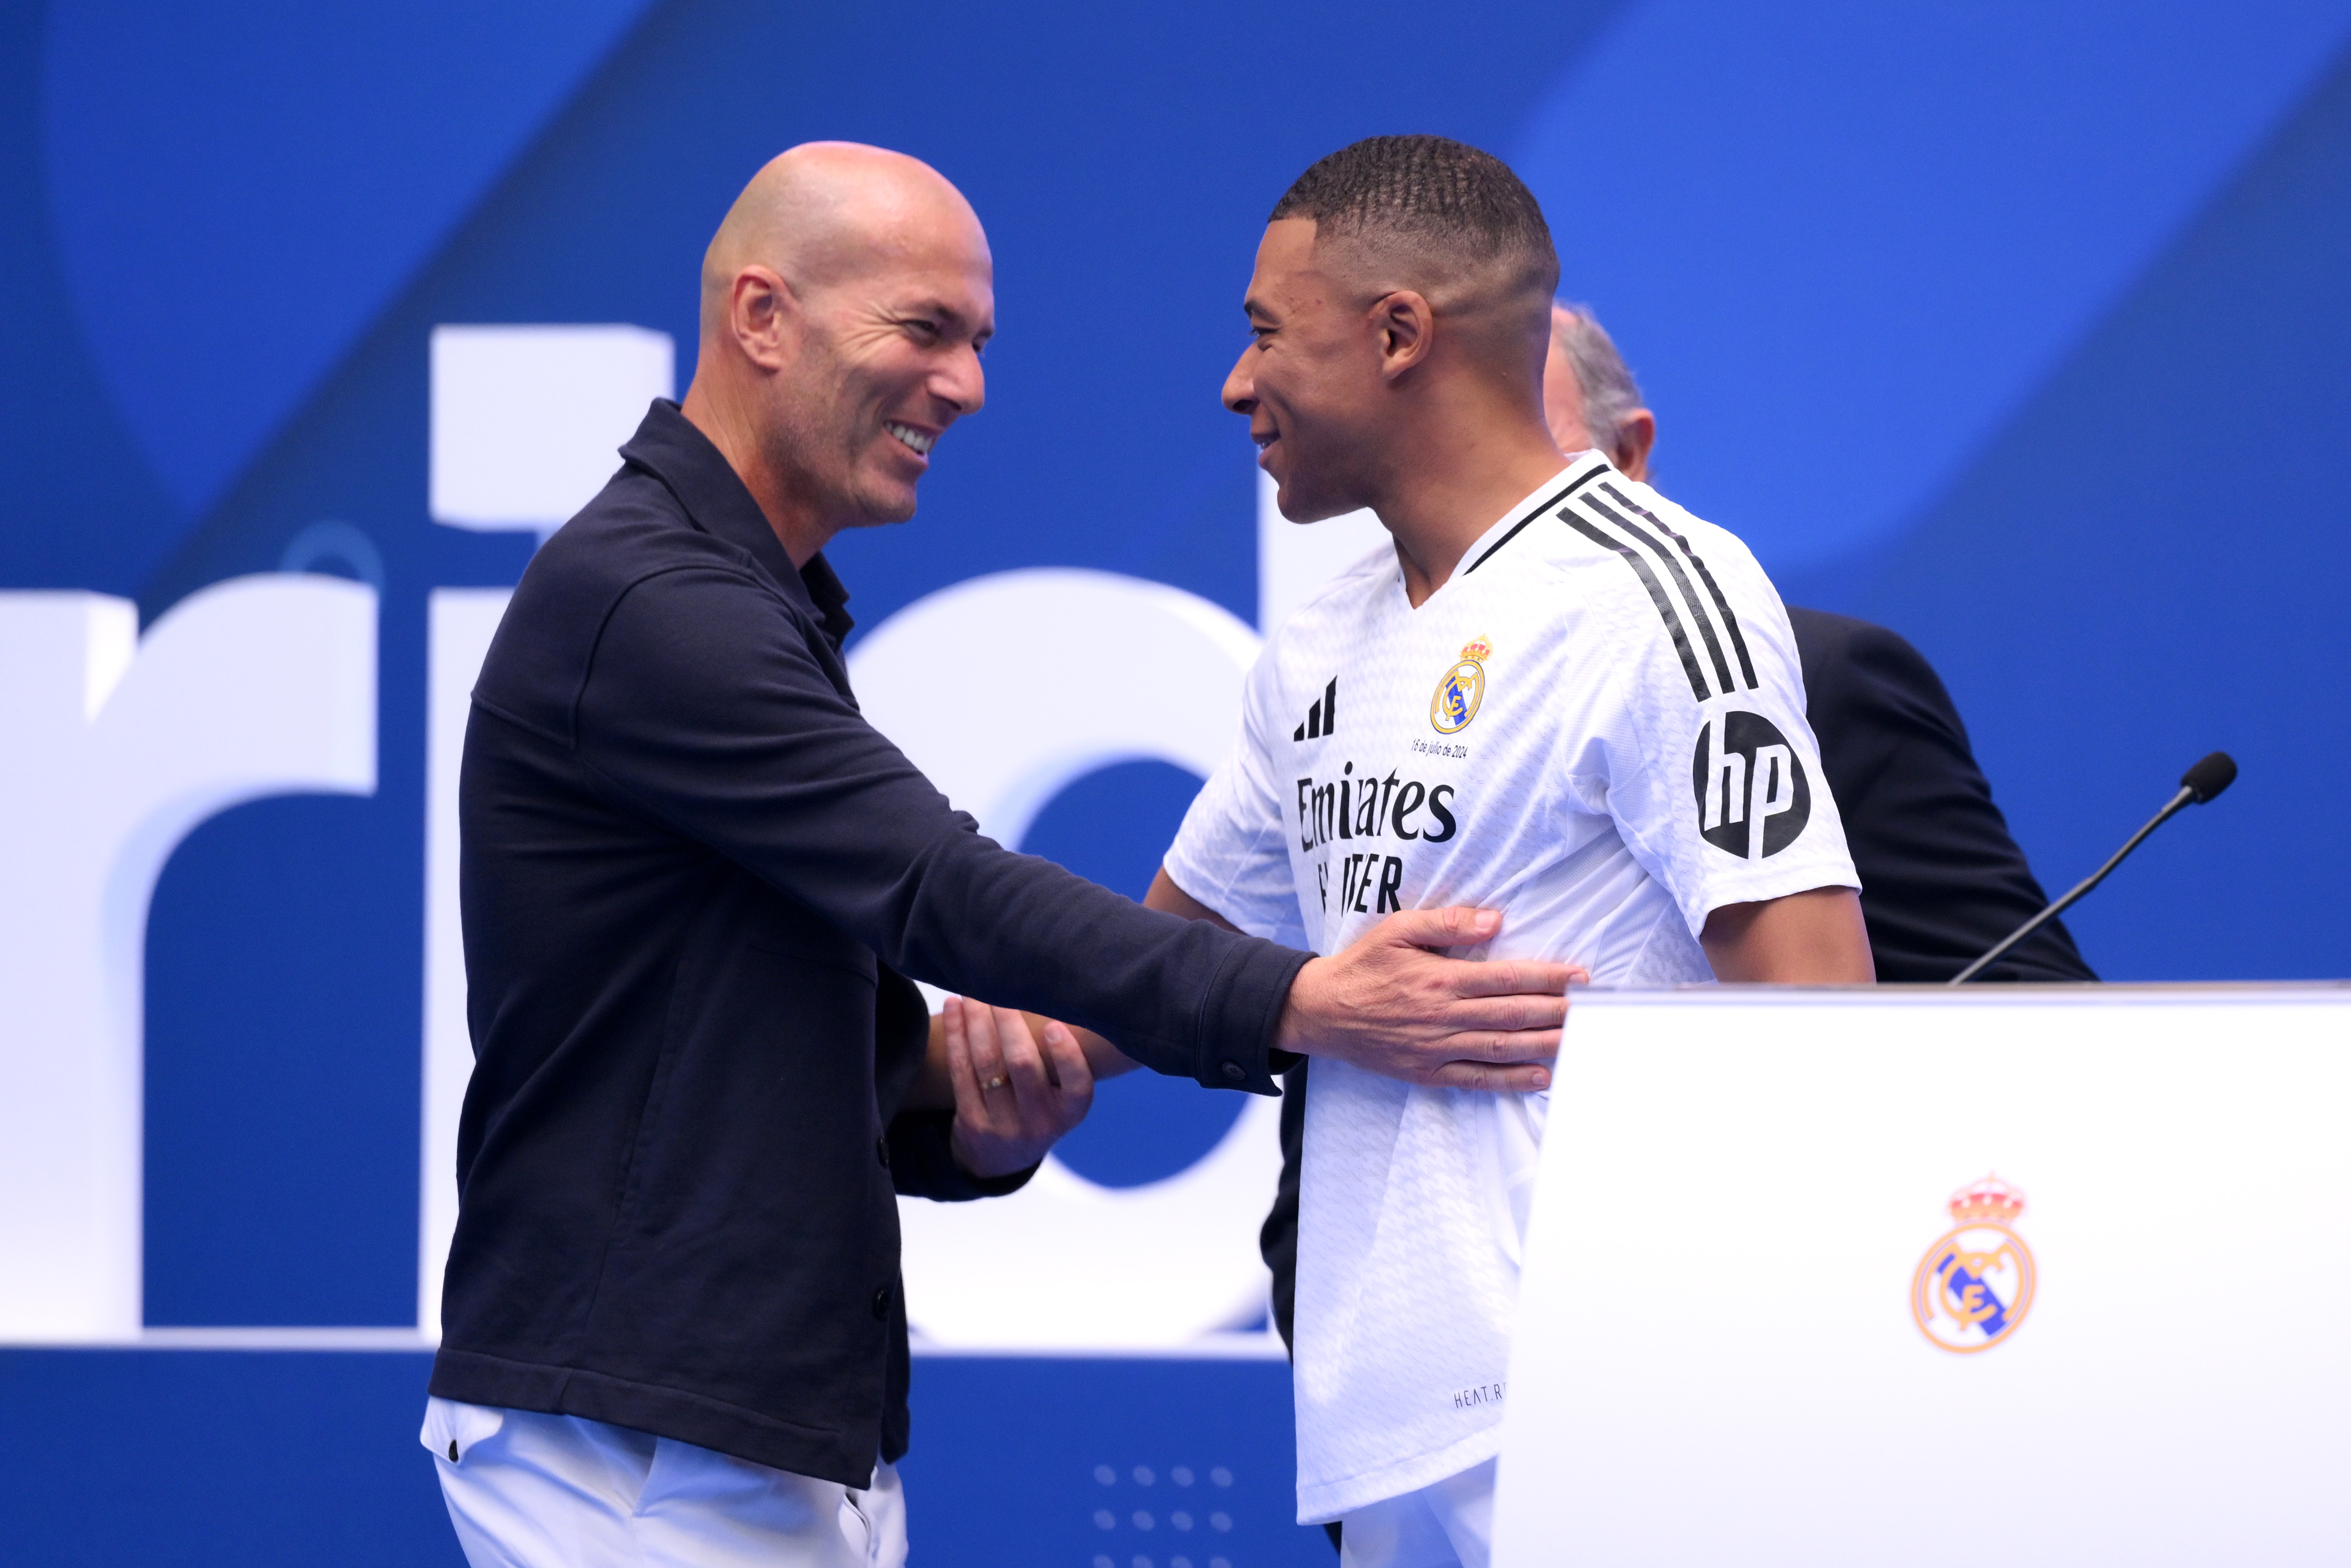 MADRID, SPAIN - JULY 16: Real Madrid new signing, Kylian Mbappe (R) is greeted by former Real Madrid player and coach, Zinedine Zidane as he is unveiled at Estadio Santiago Bernabeu on July 16, 2024 in Madrid, Spain. (Photo by David Ramos/Getty Images)